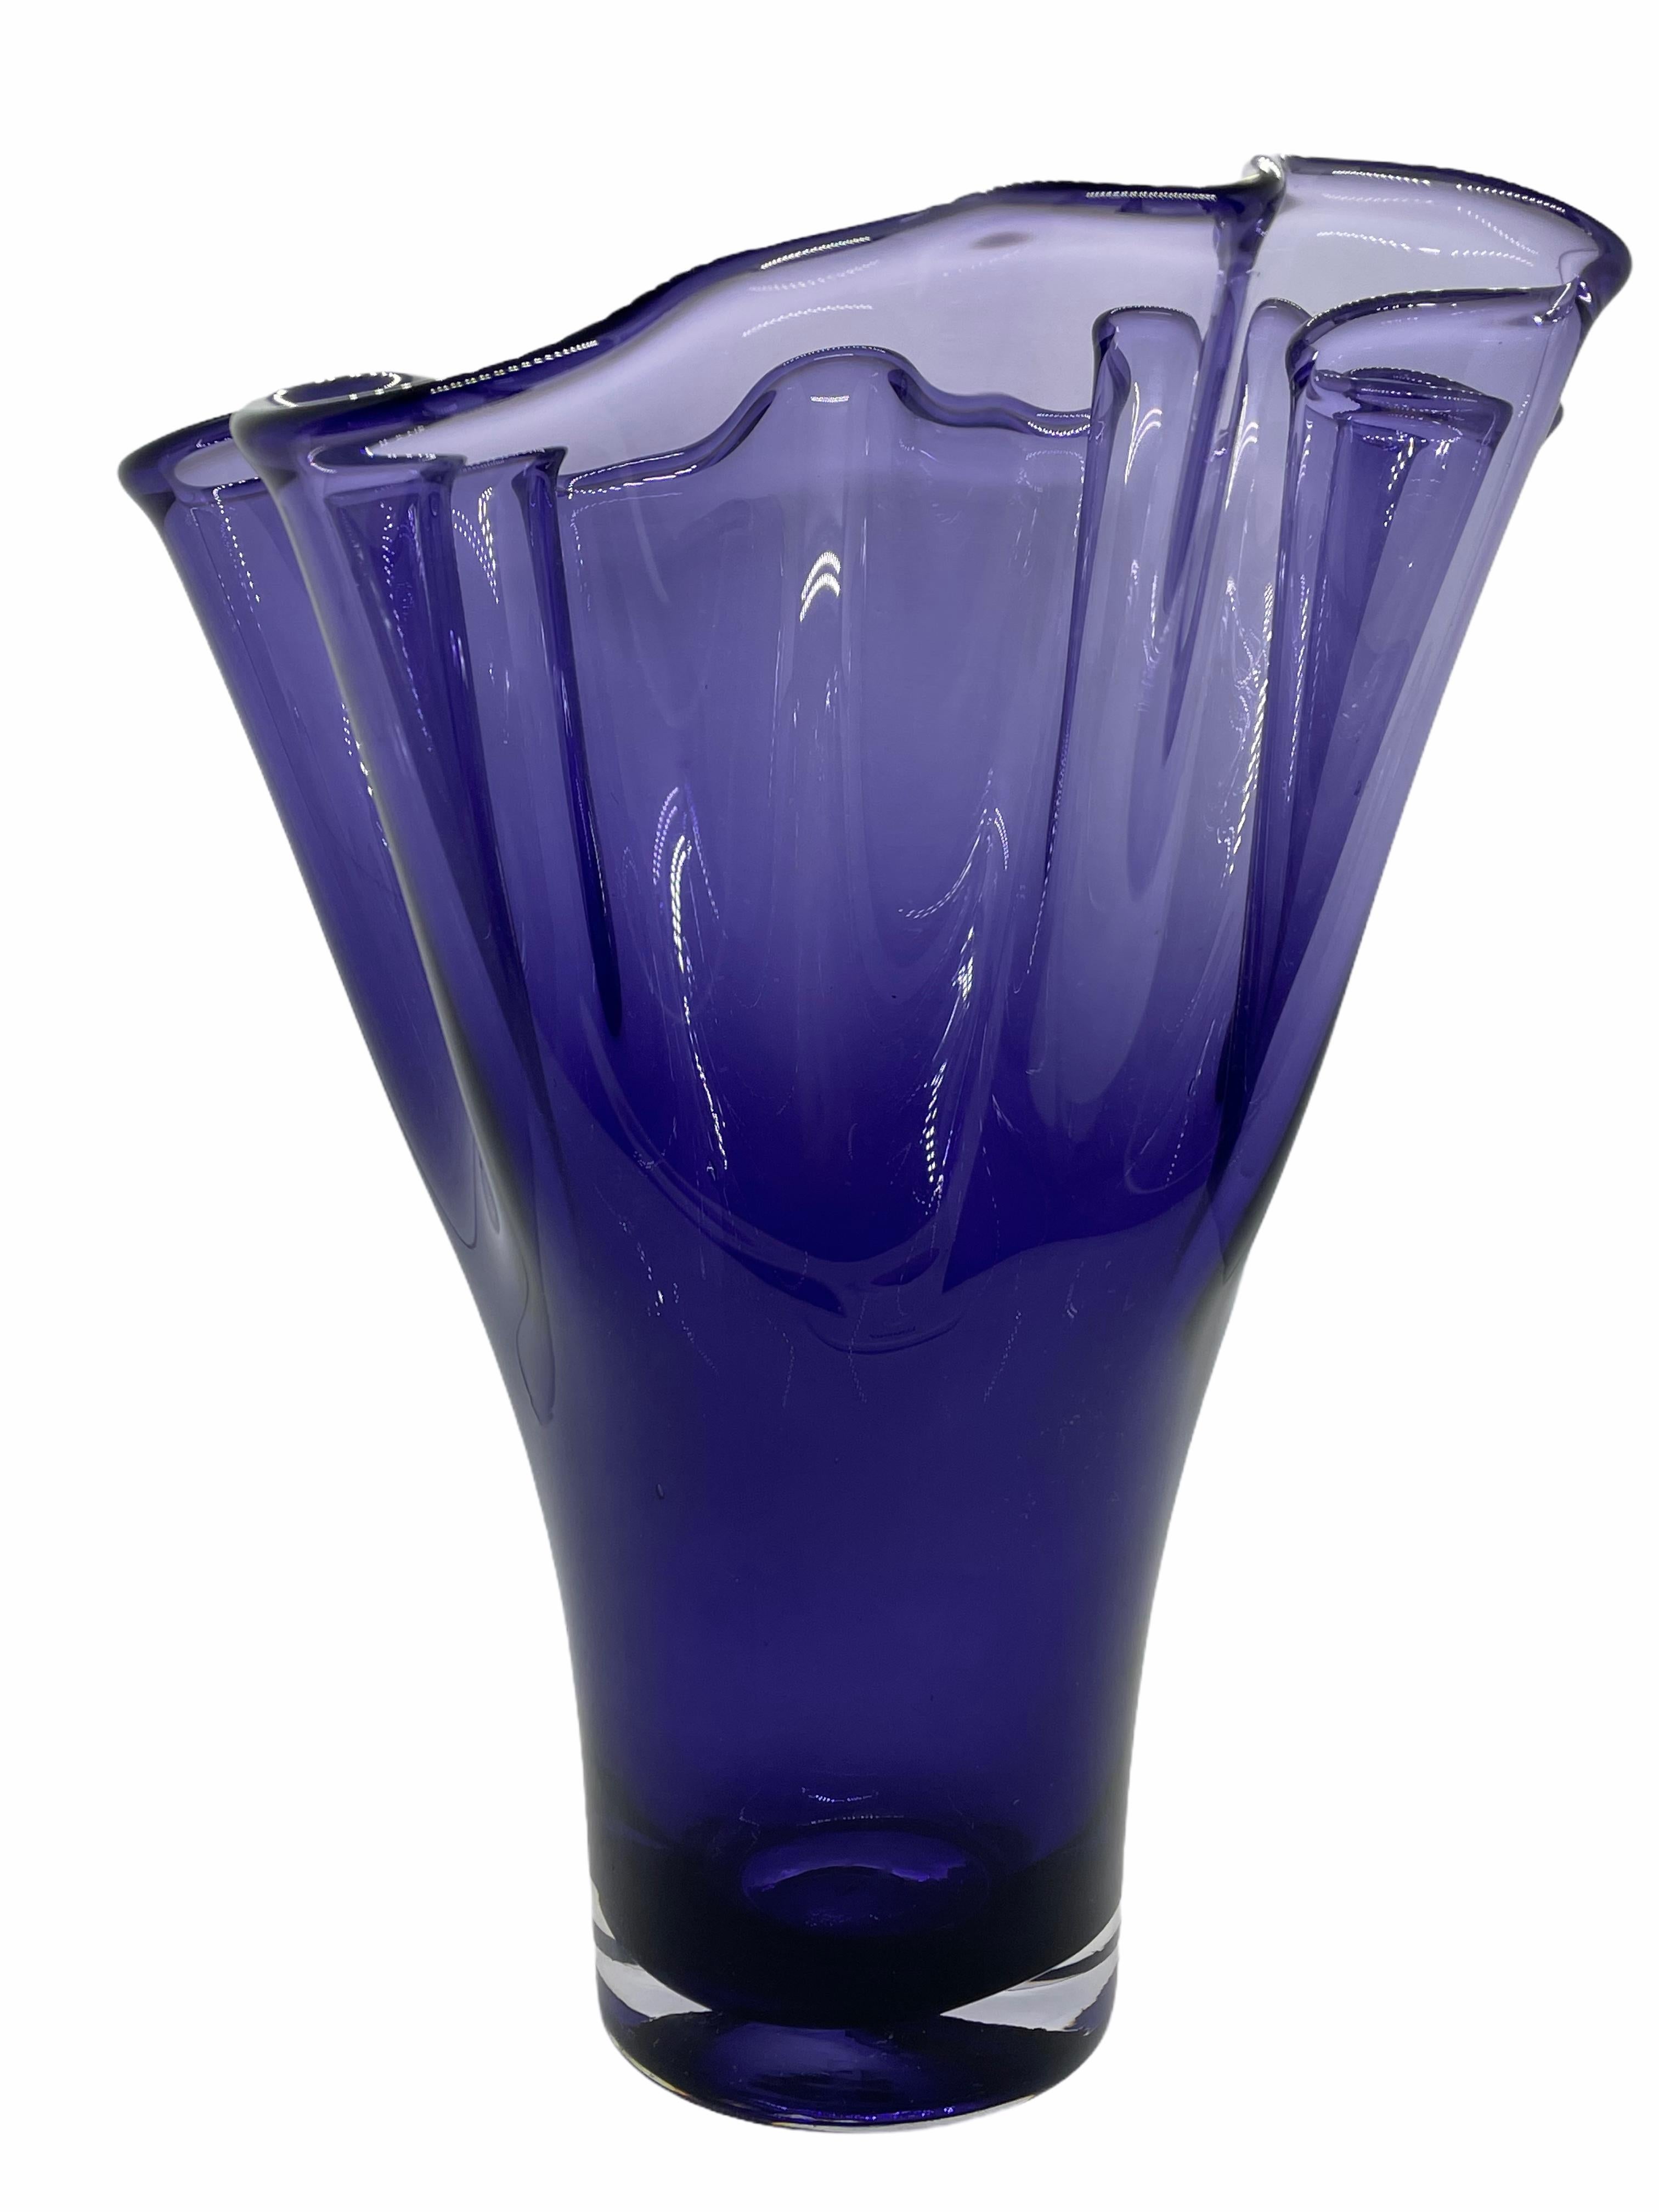 Beautiful Murano hand blown purple Italian art glass handkerchief vase with some small air bubbles in the glass. Measures: 9 3/4